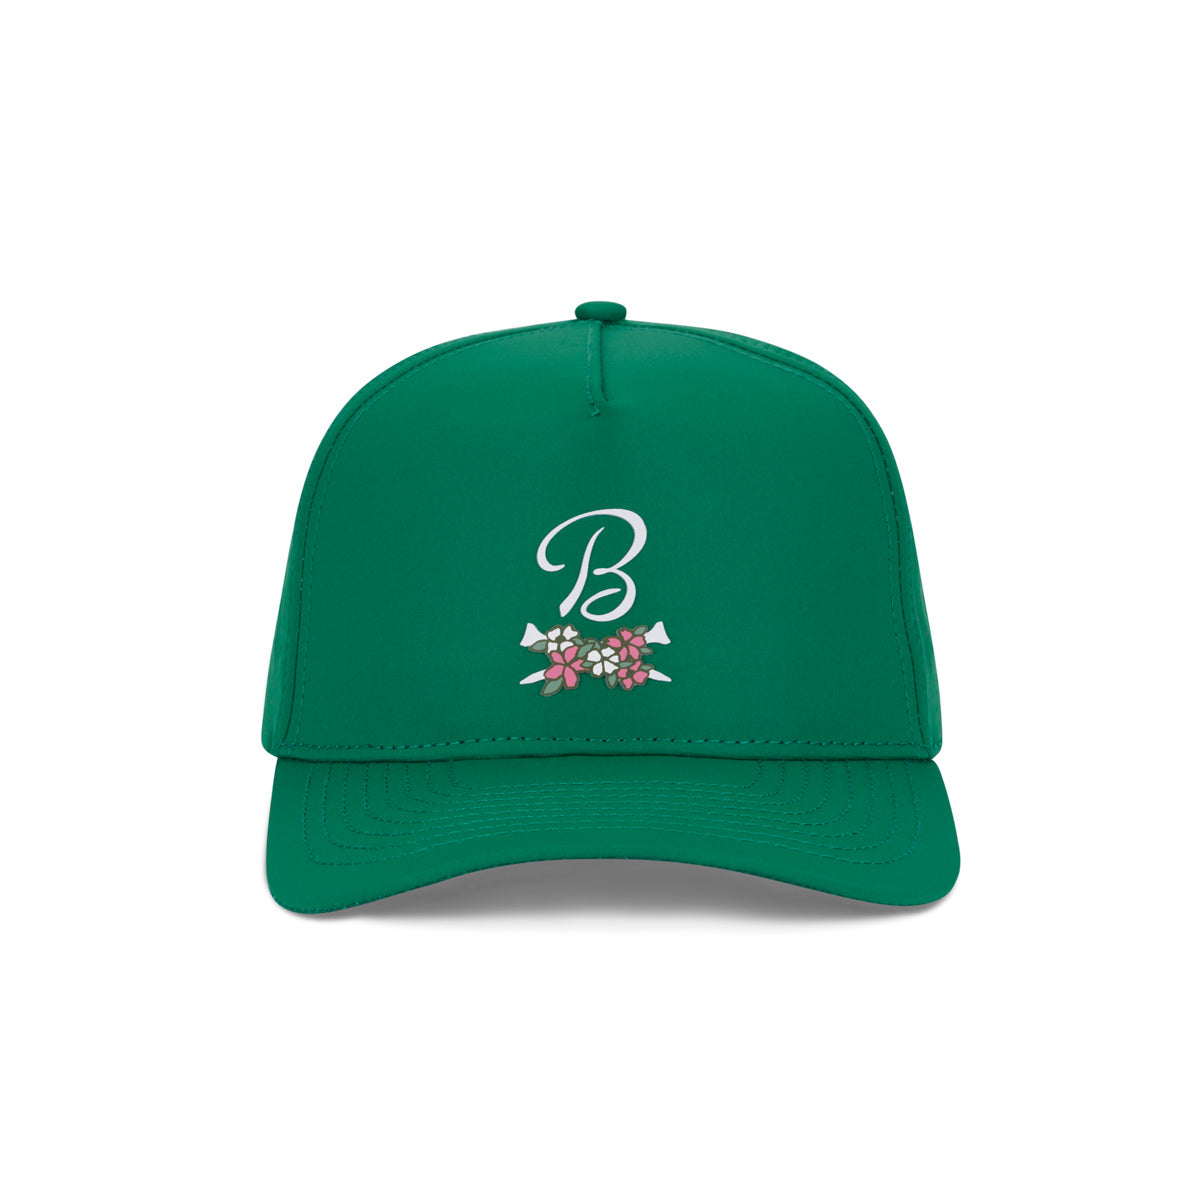 Barstool Golf Flower Crossed Tees Performance Hat-Hats-Fore Play-Green-Barstool Sports